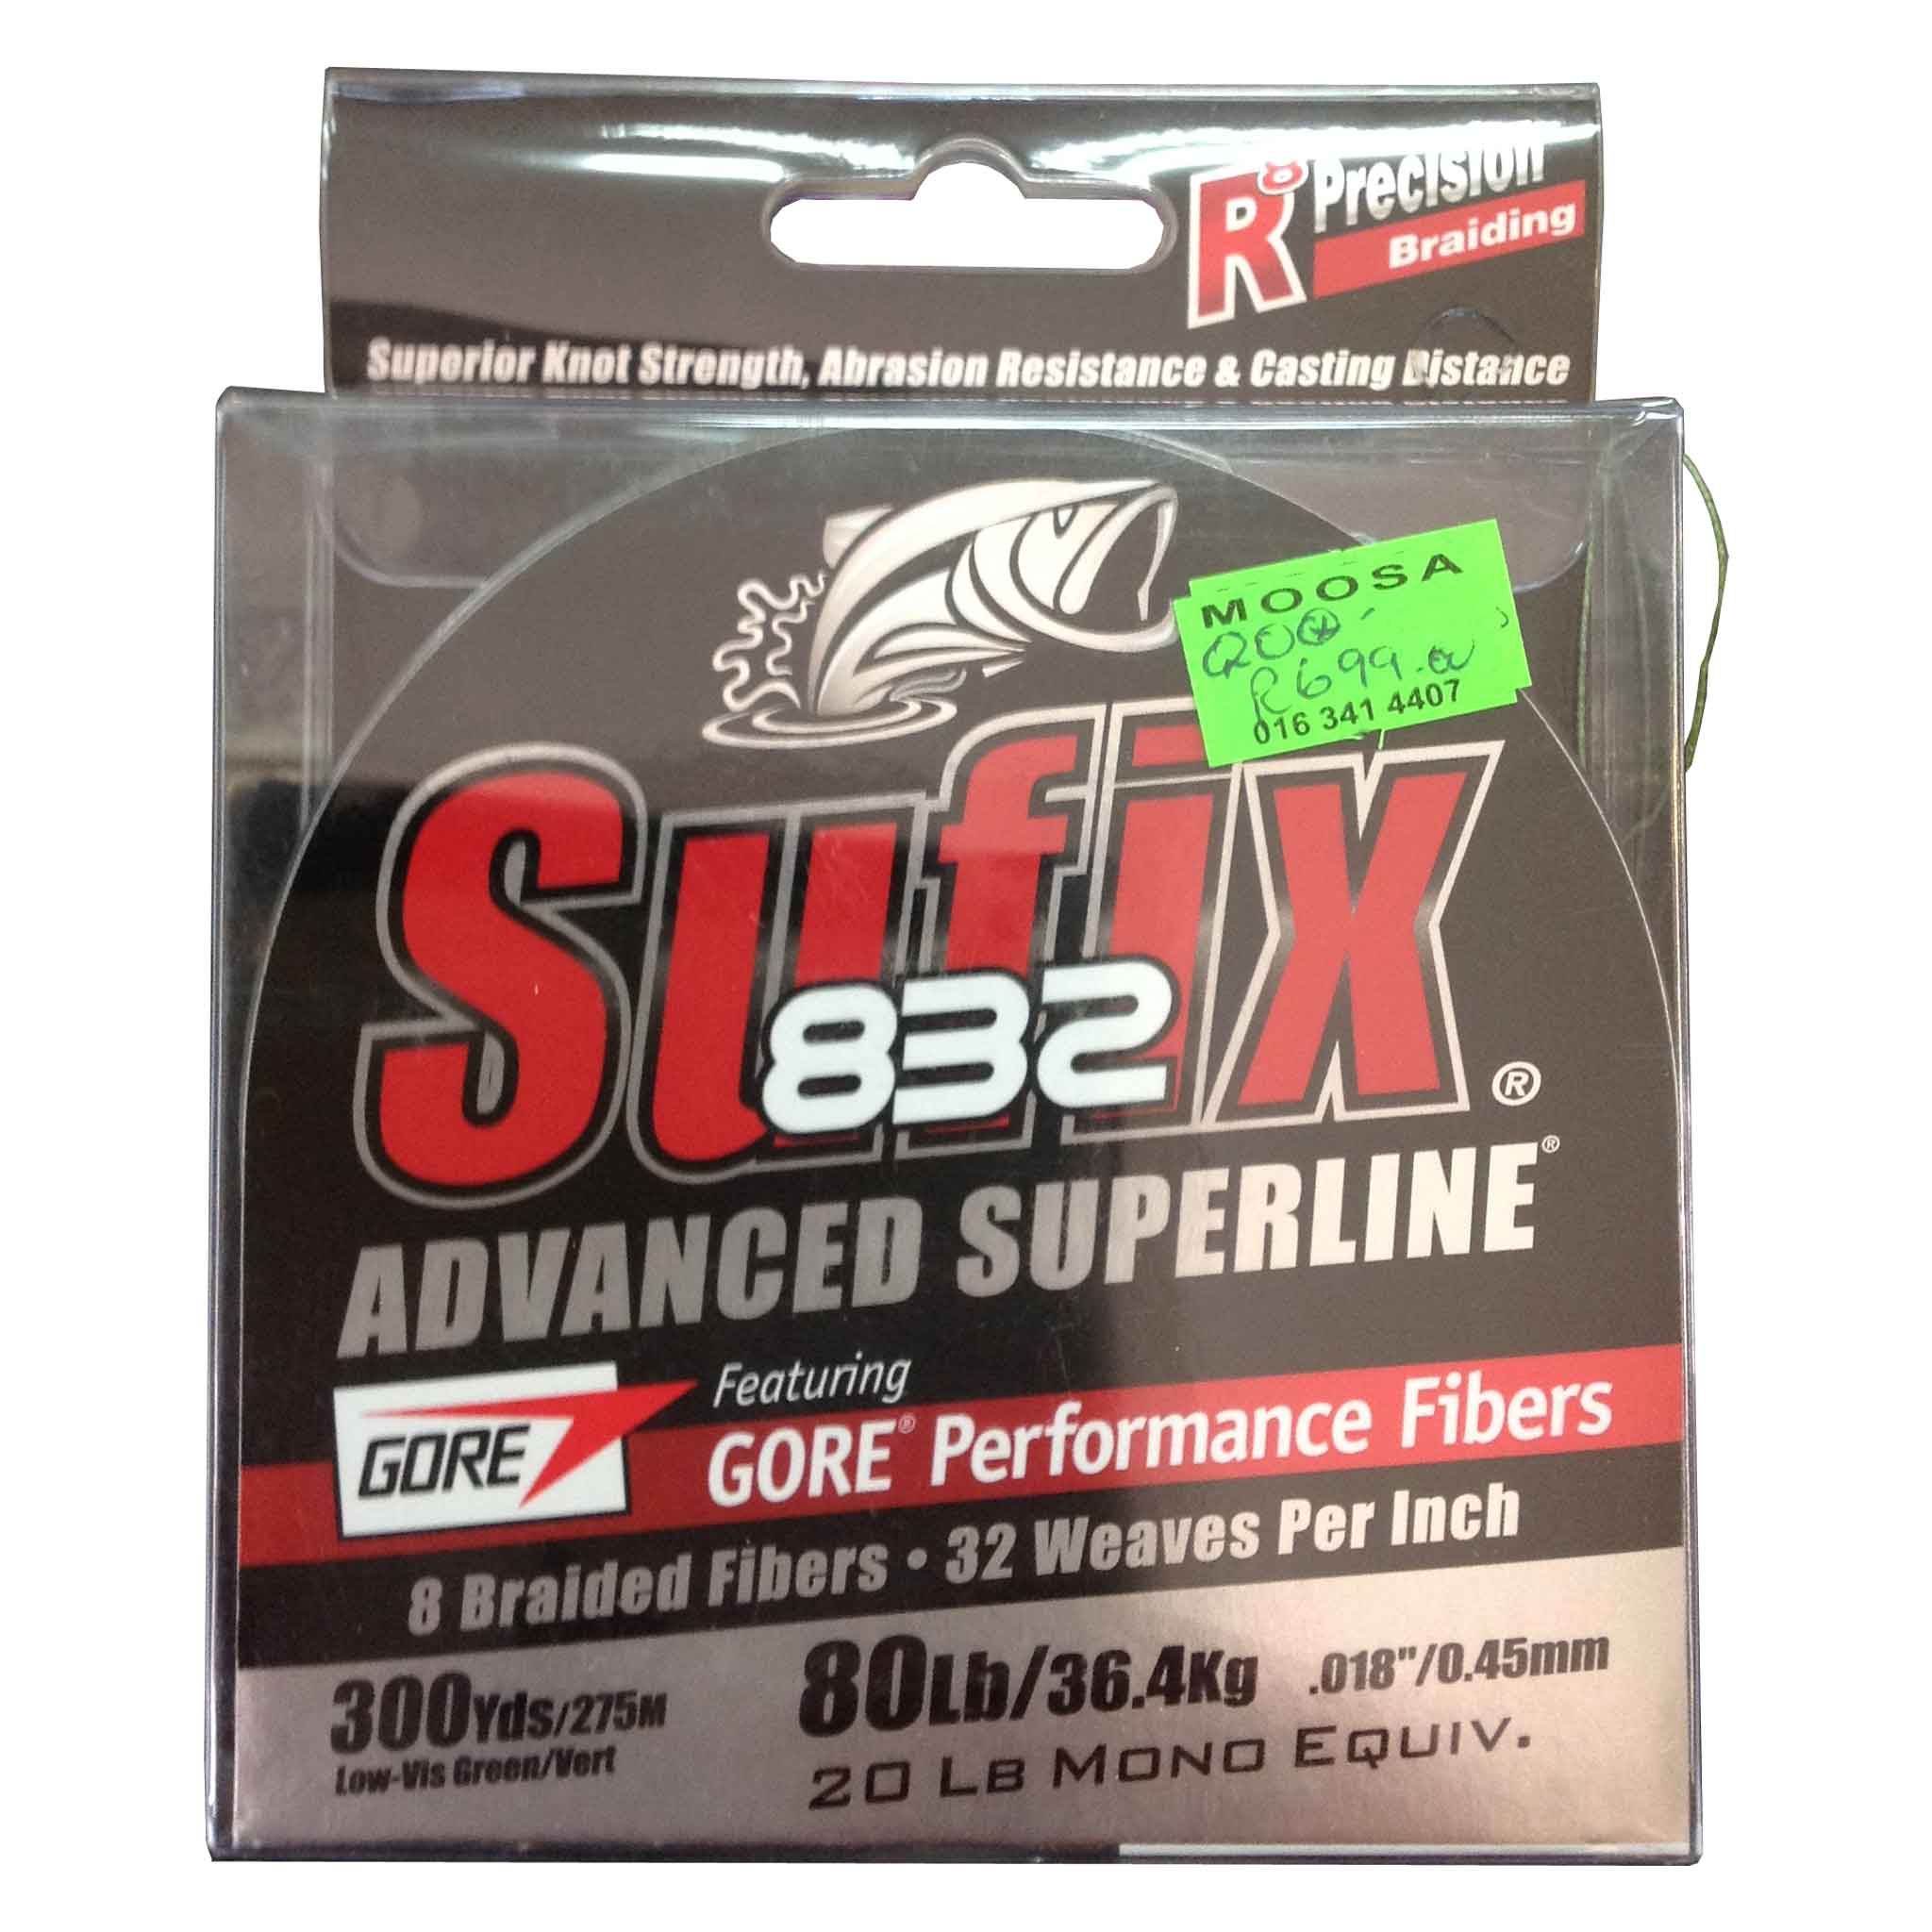 SUFIX 832 ADVANCED SUPERLINE BRAID 80LB - Moosa's Angling And Outdoor